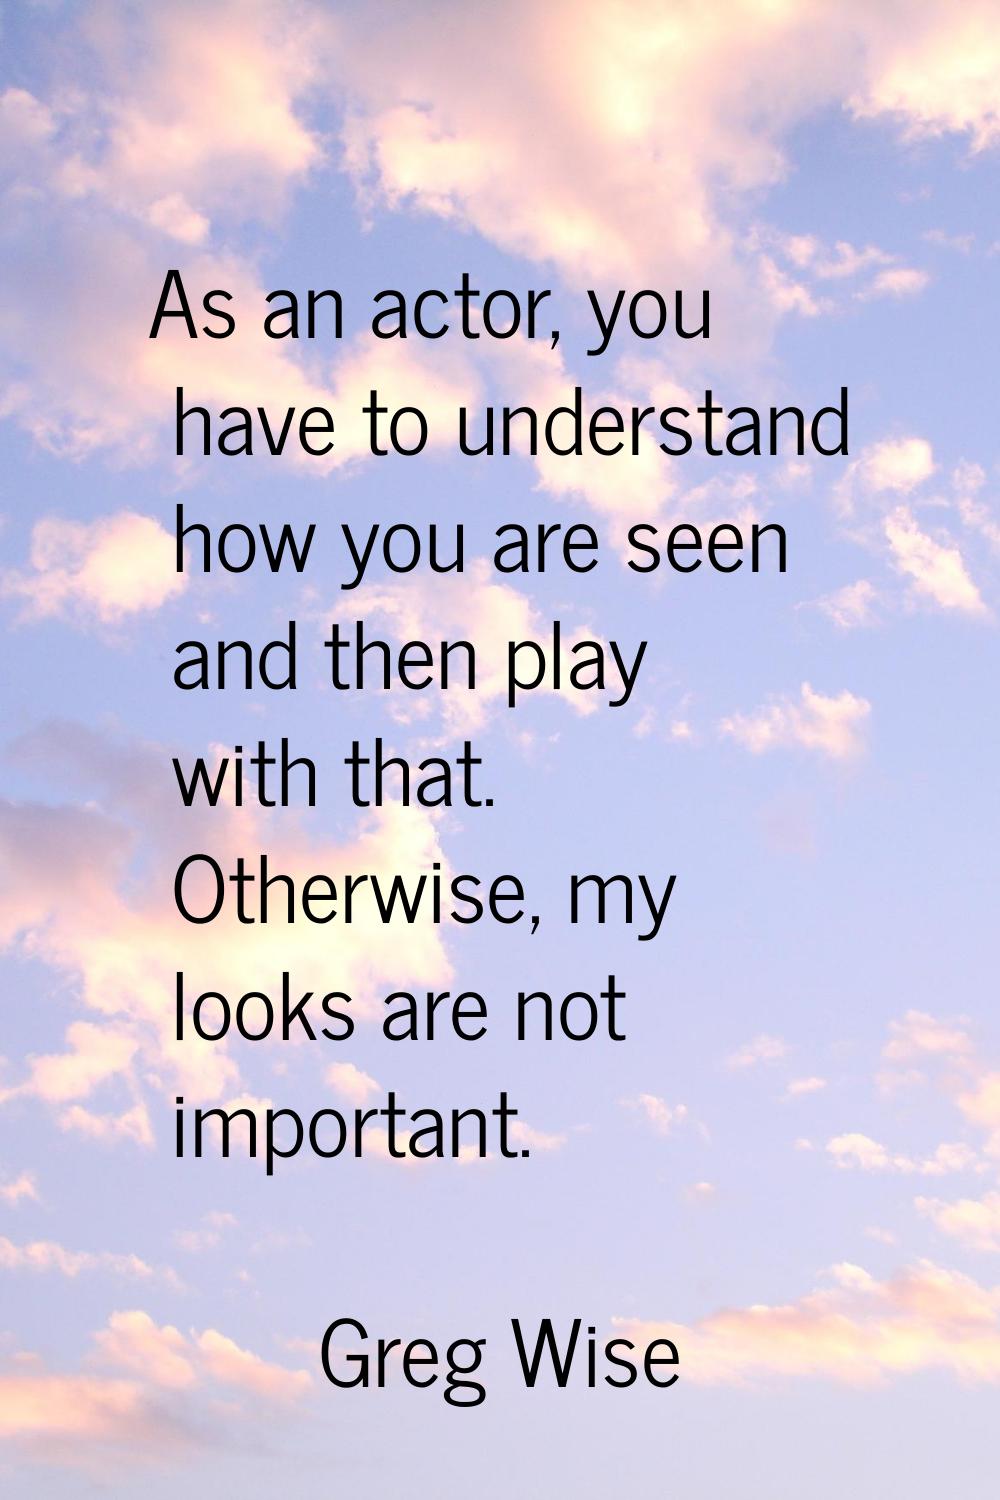 As an actor, you have to understand how you are seen and then play with that. Otherwise, my looks a